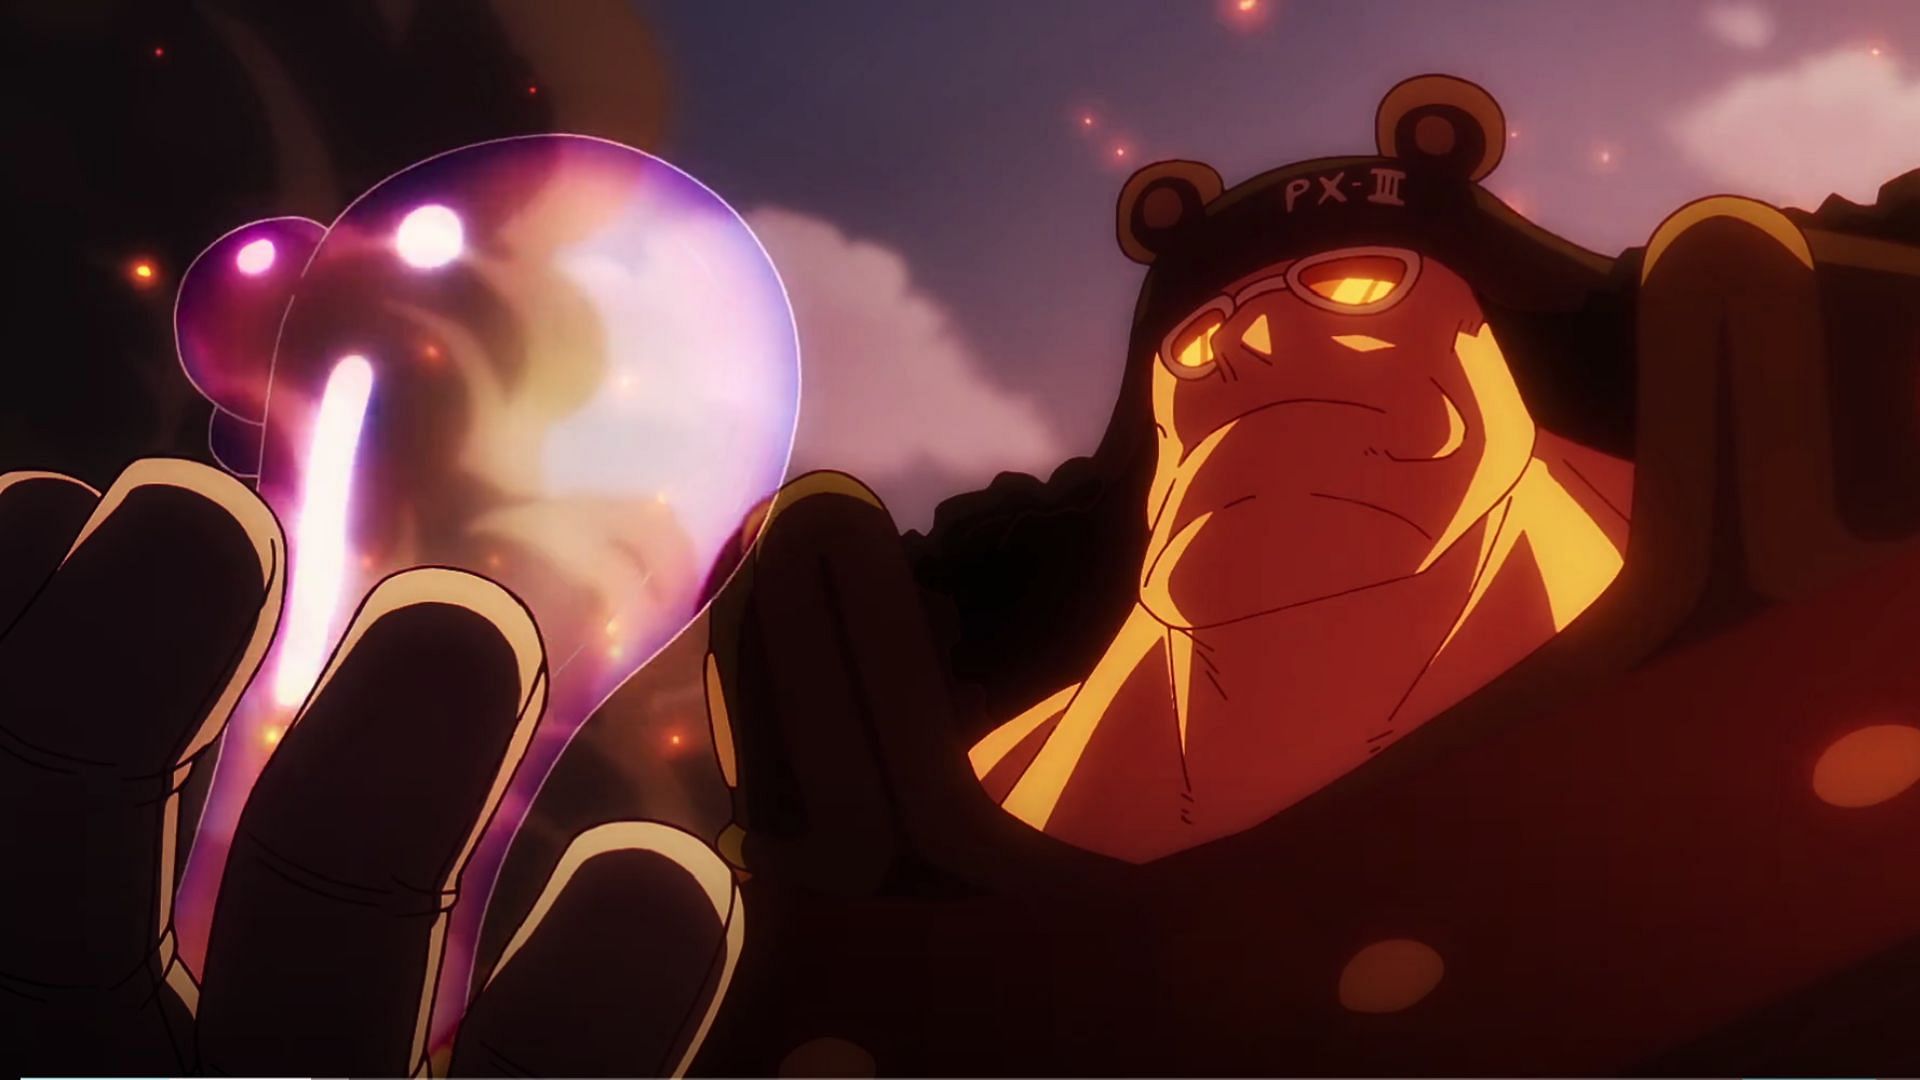 Pacista using Bubble Shield as seen in the One Piece anime (Image via Toei)